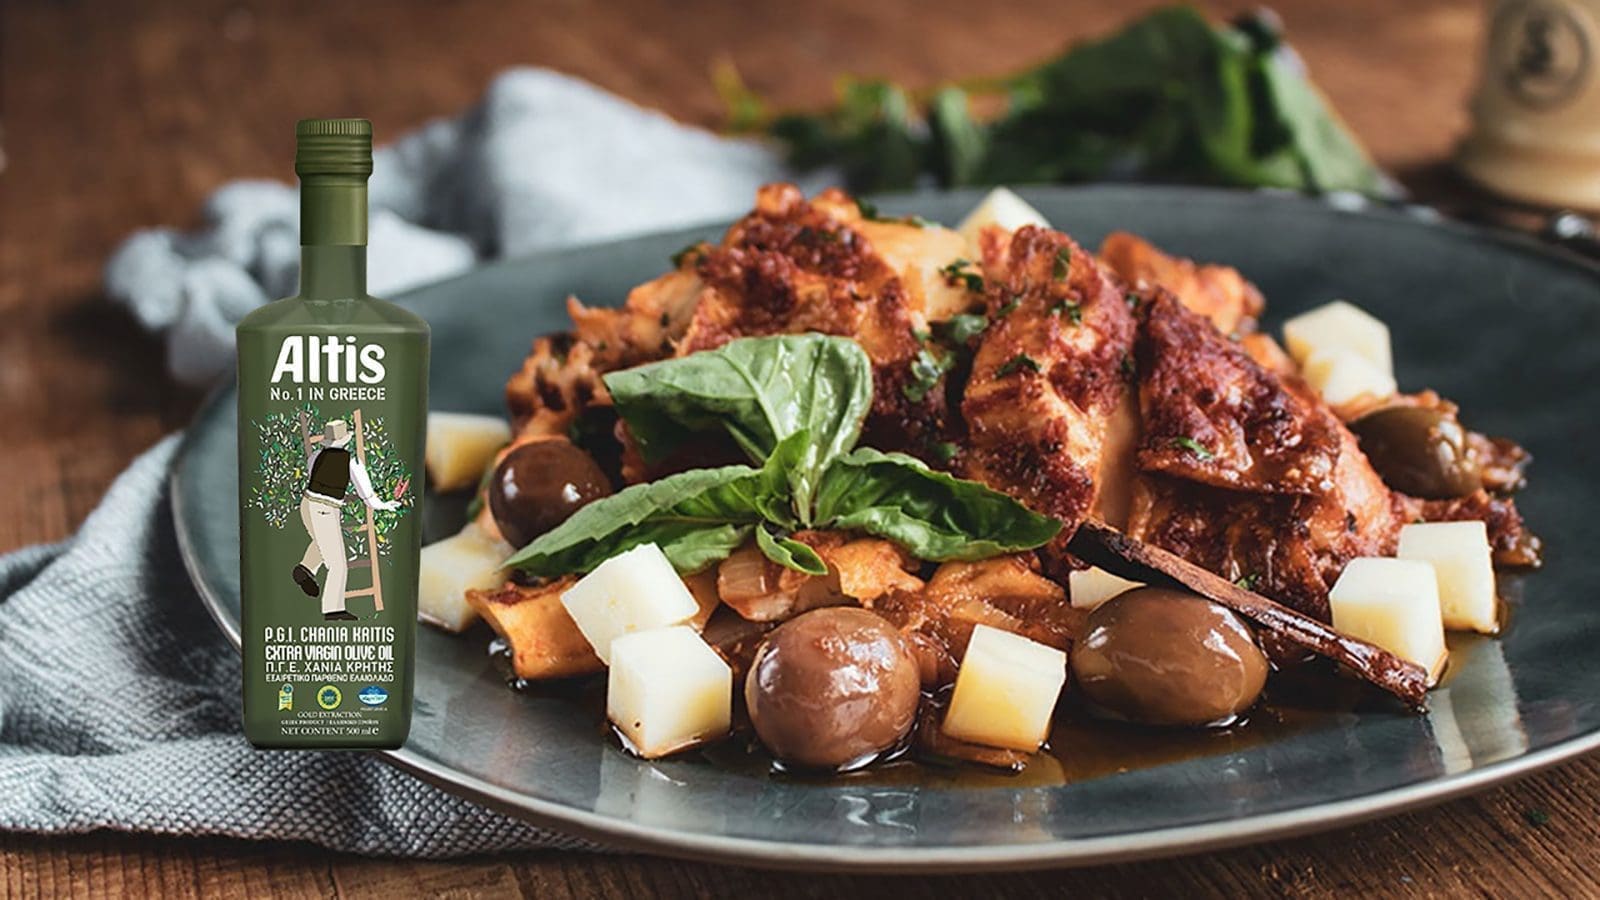 Upfield introduces Altis Extra Virgin Olive Oil in Kenya promoting healthy living